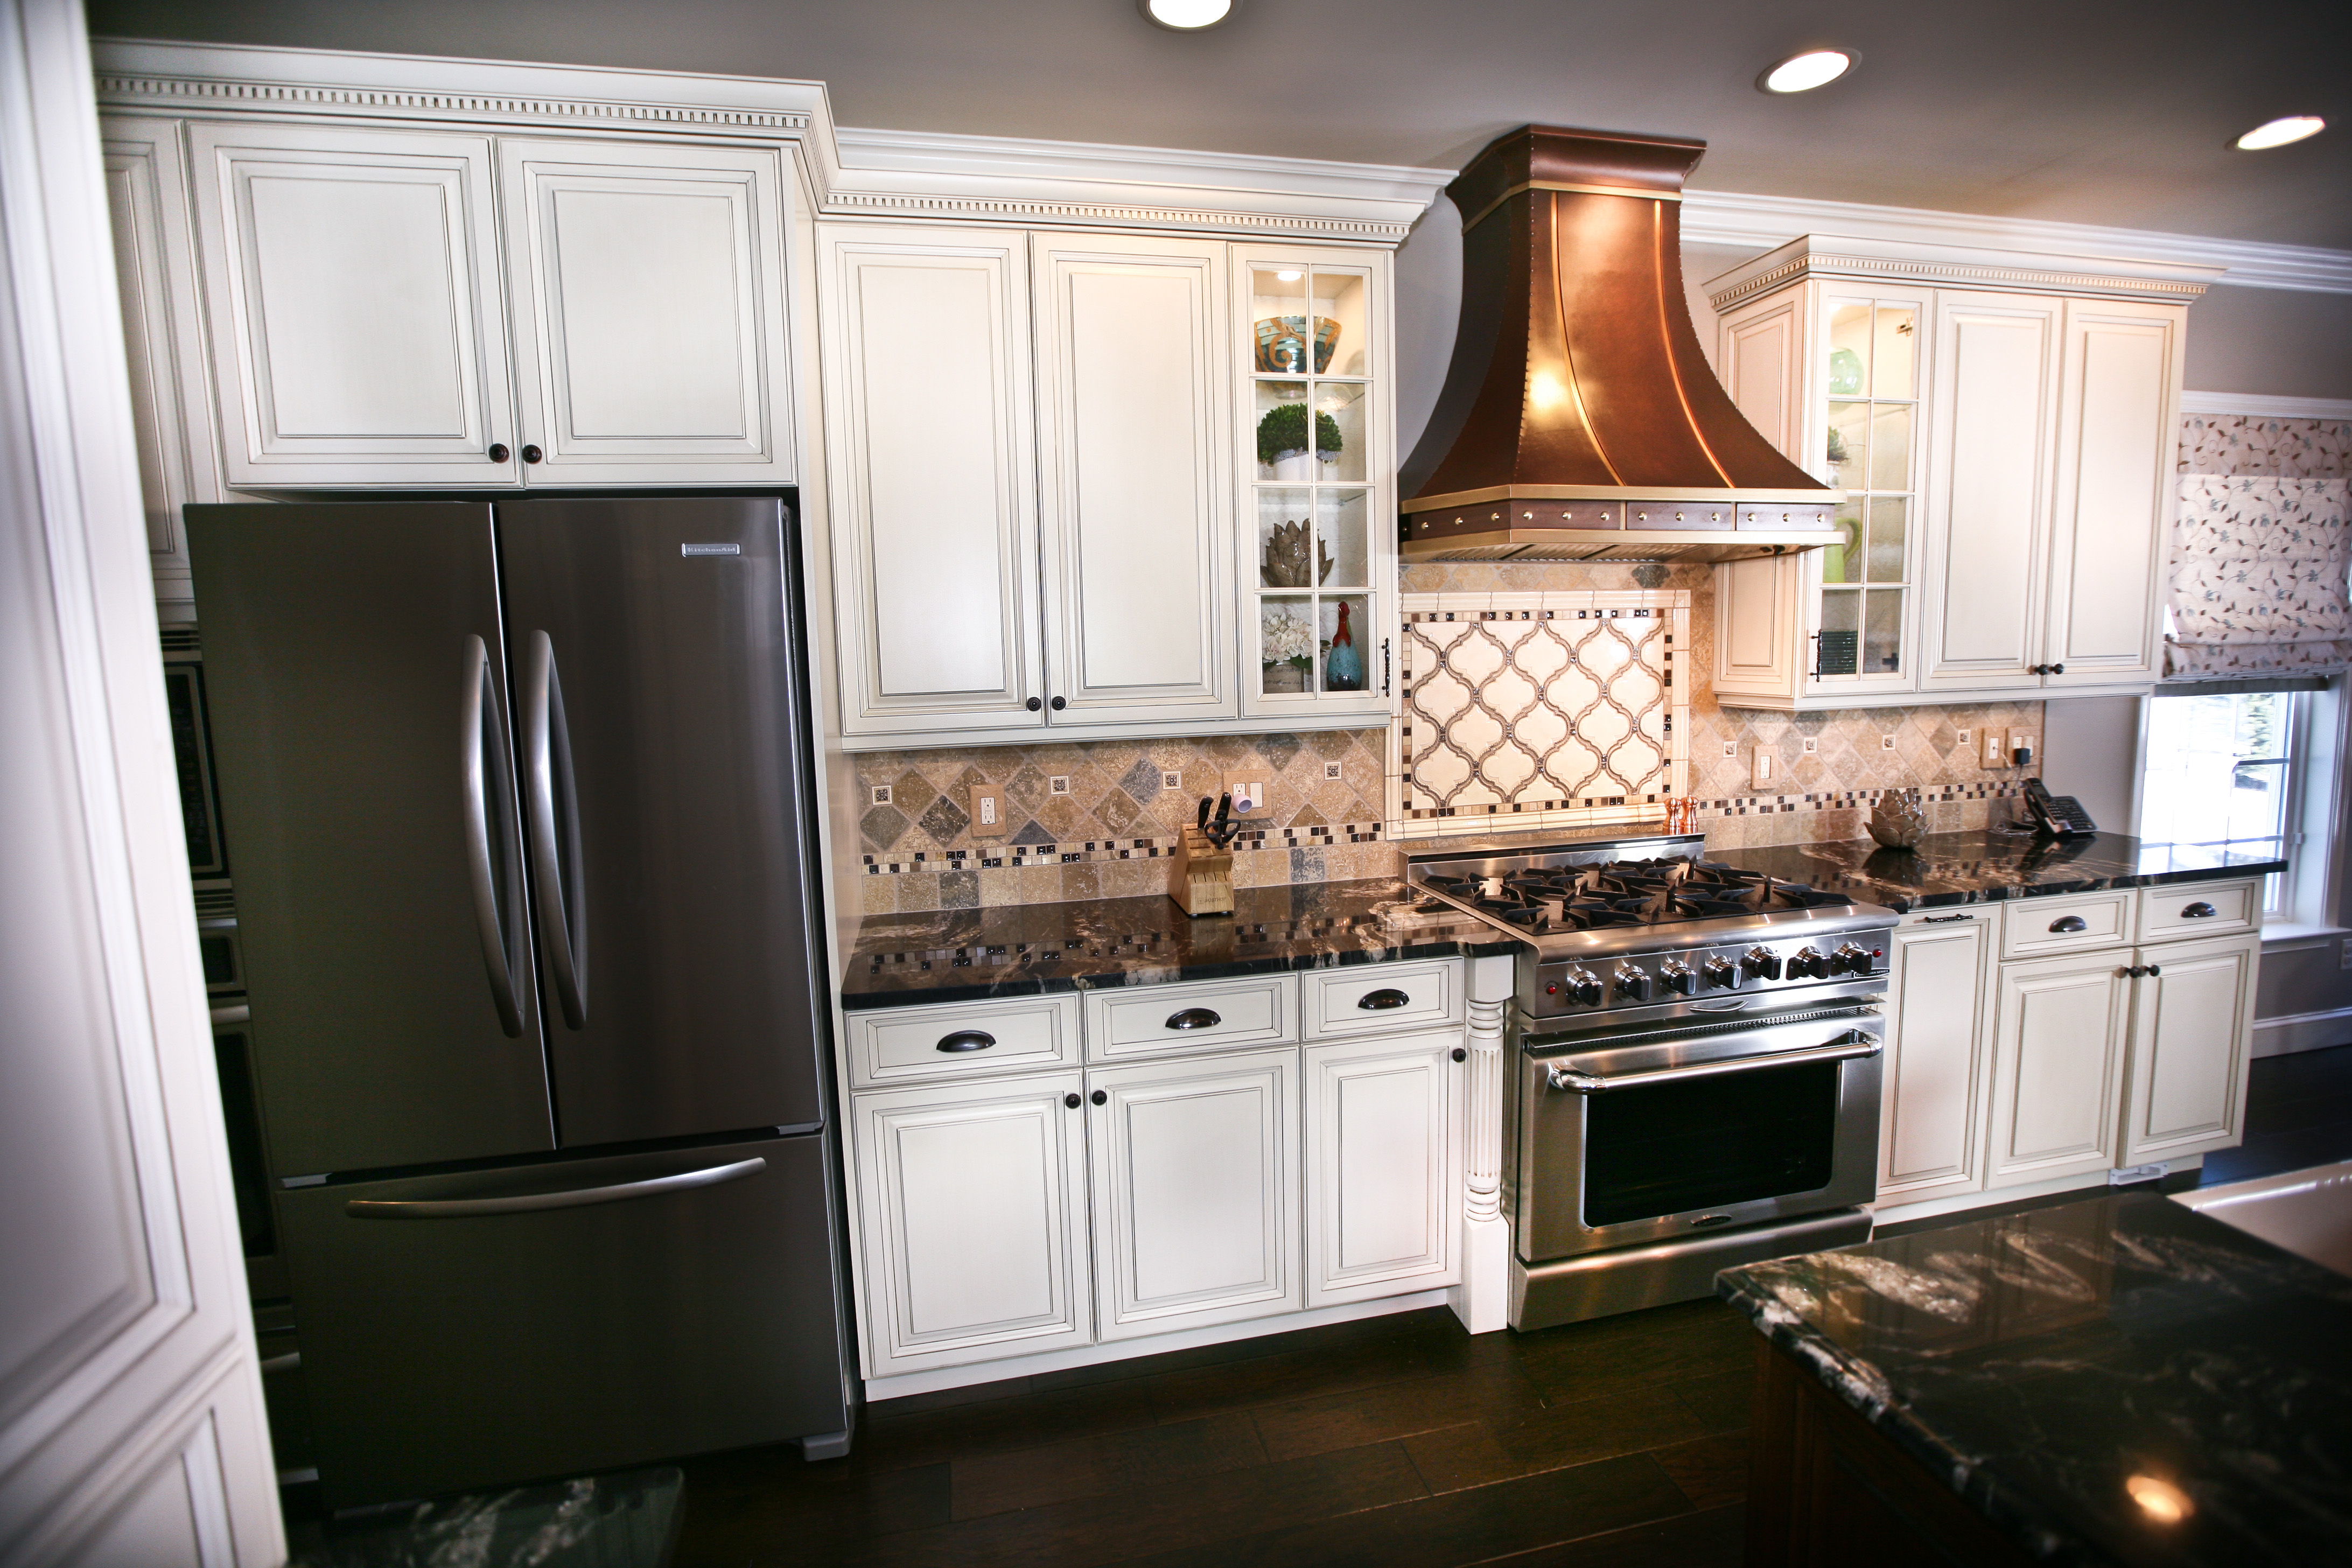 Top Rated Kitchen Farmingdale New Jersey by Design Line ...